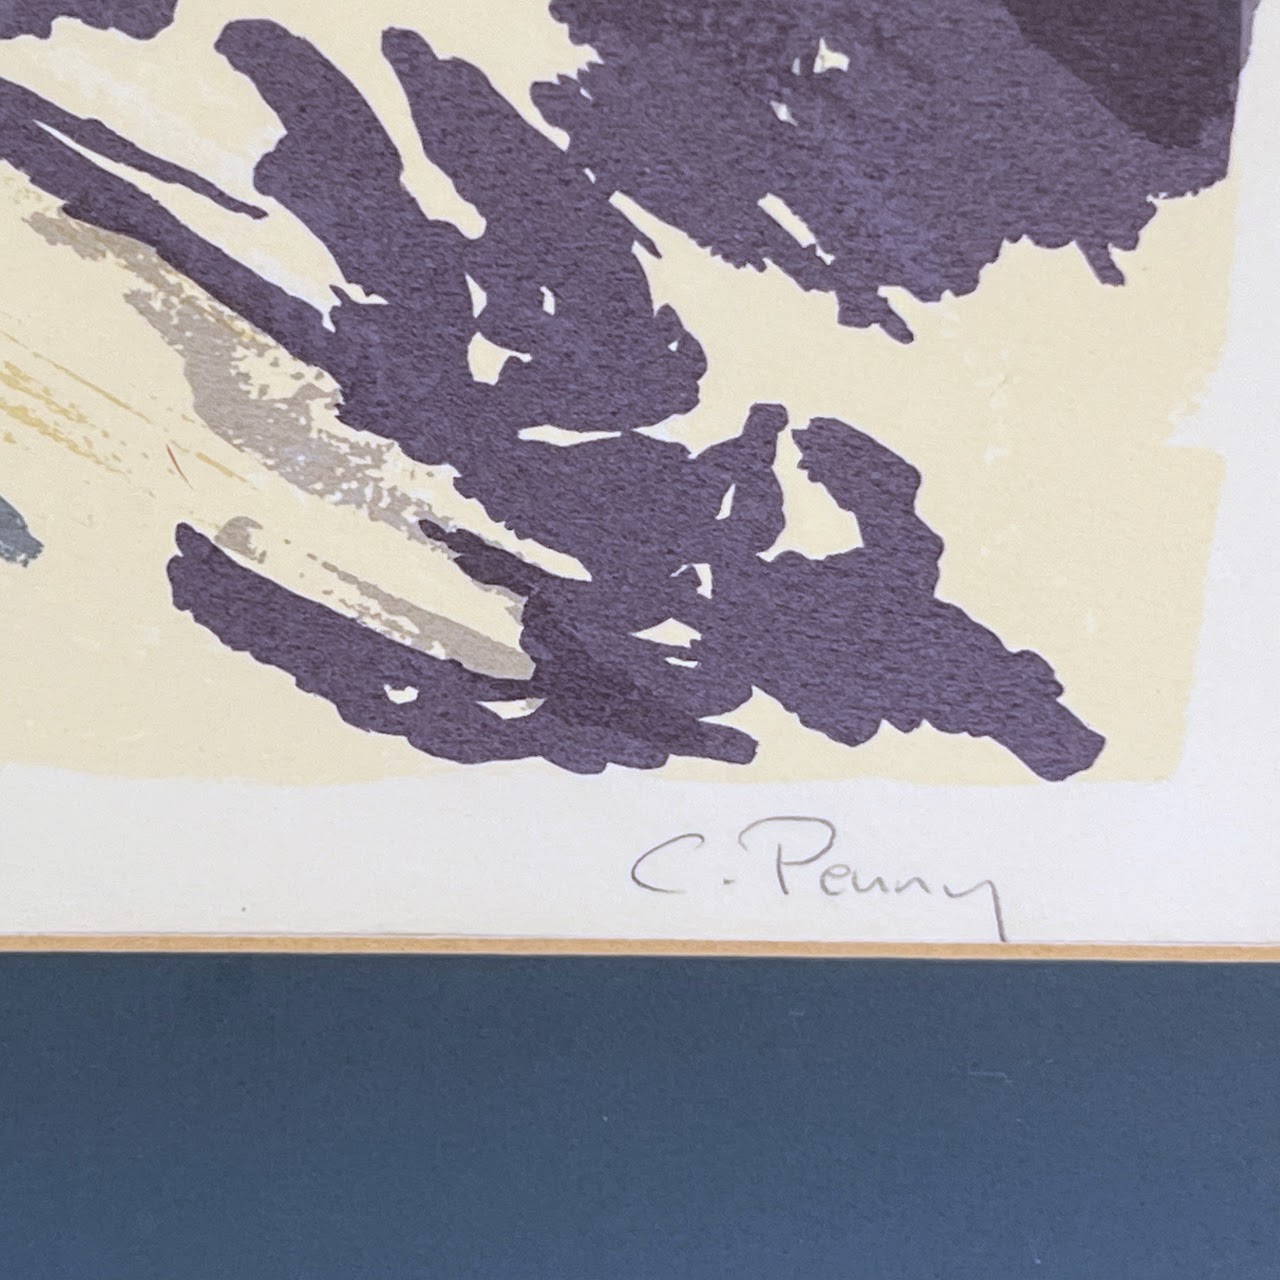 Charles Penny 'Terrazza I' Signed Lithograph